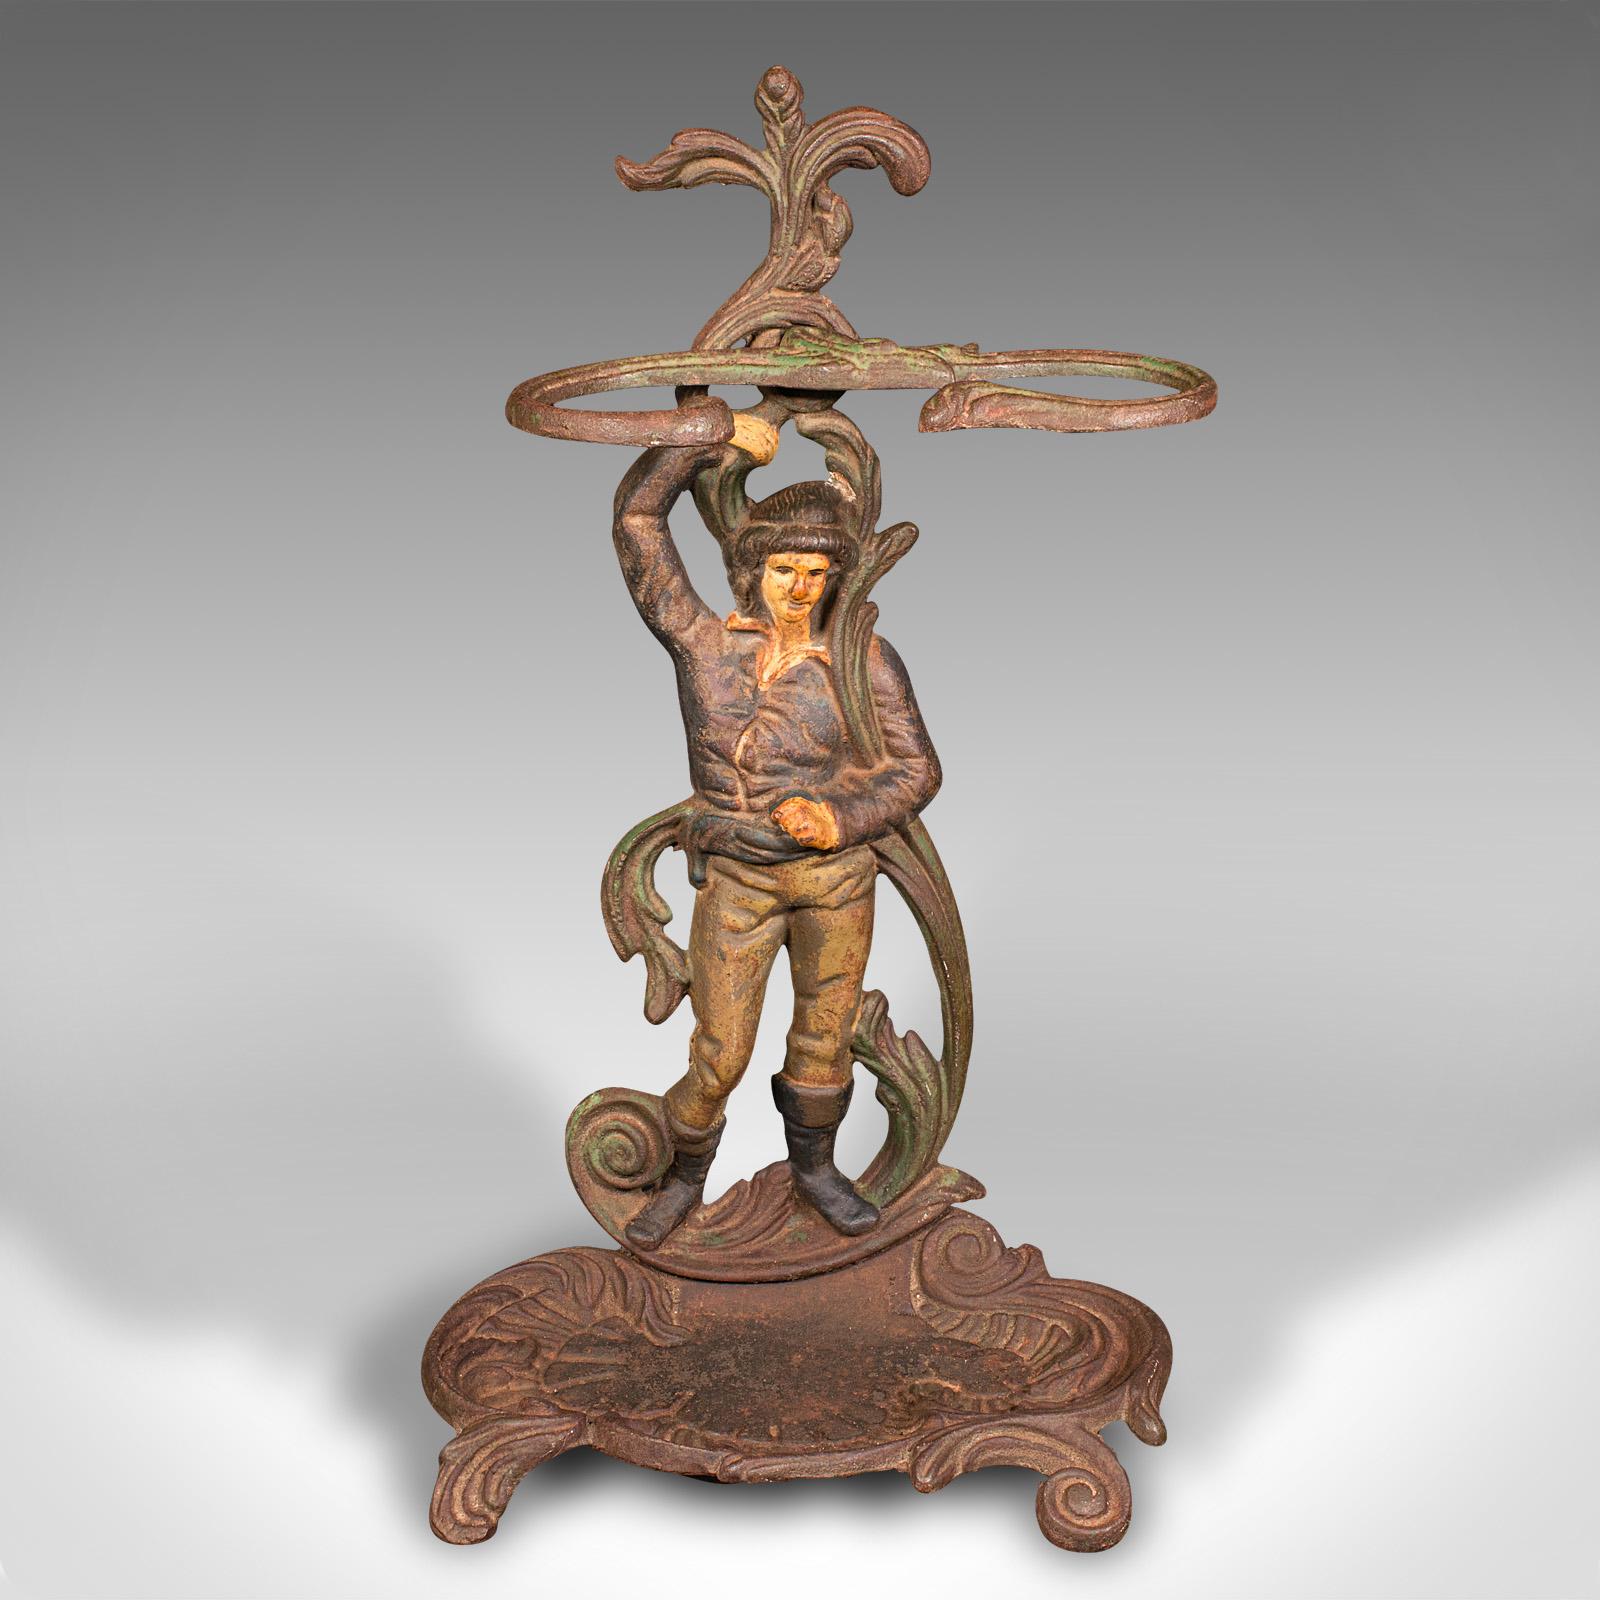 This is an antique figural umbrella stand. A French, painted cast iron decorative hall rack, dating to the late Victorian period, circa 1900.

Charming chap supports this stand in appealing fashion
Displays a desirable aged patina throughout
Cast